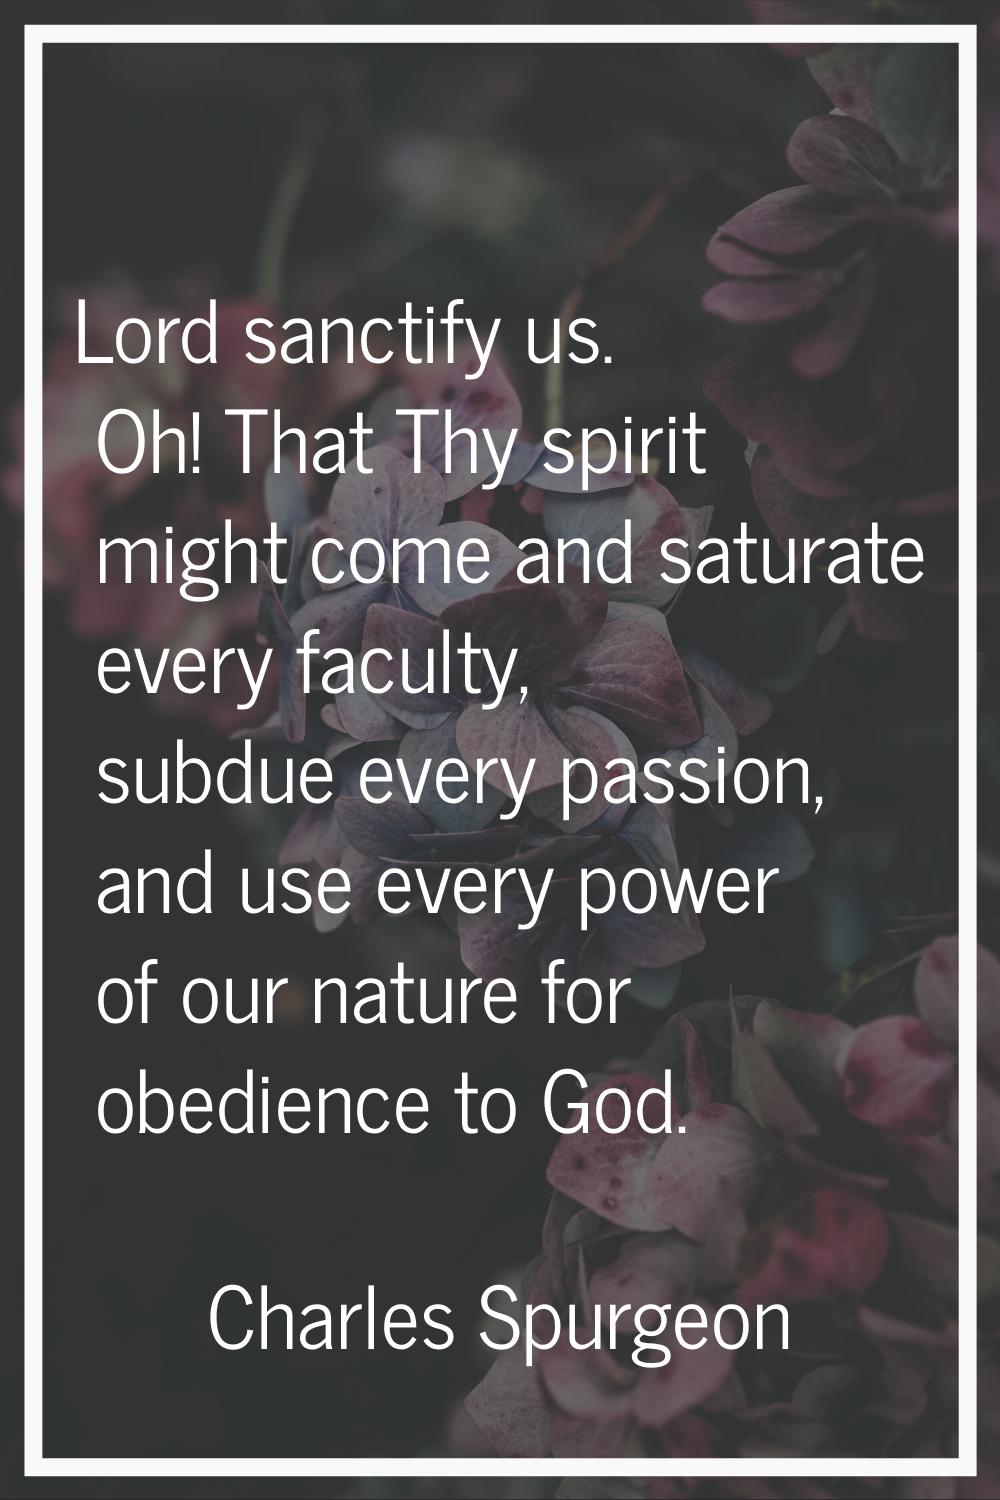 Lord sanctify us. Oh! That Thy spirit might come and saturate every faculty, subdue every passion, 